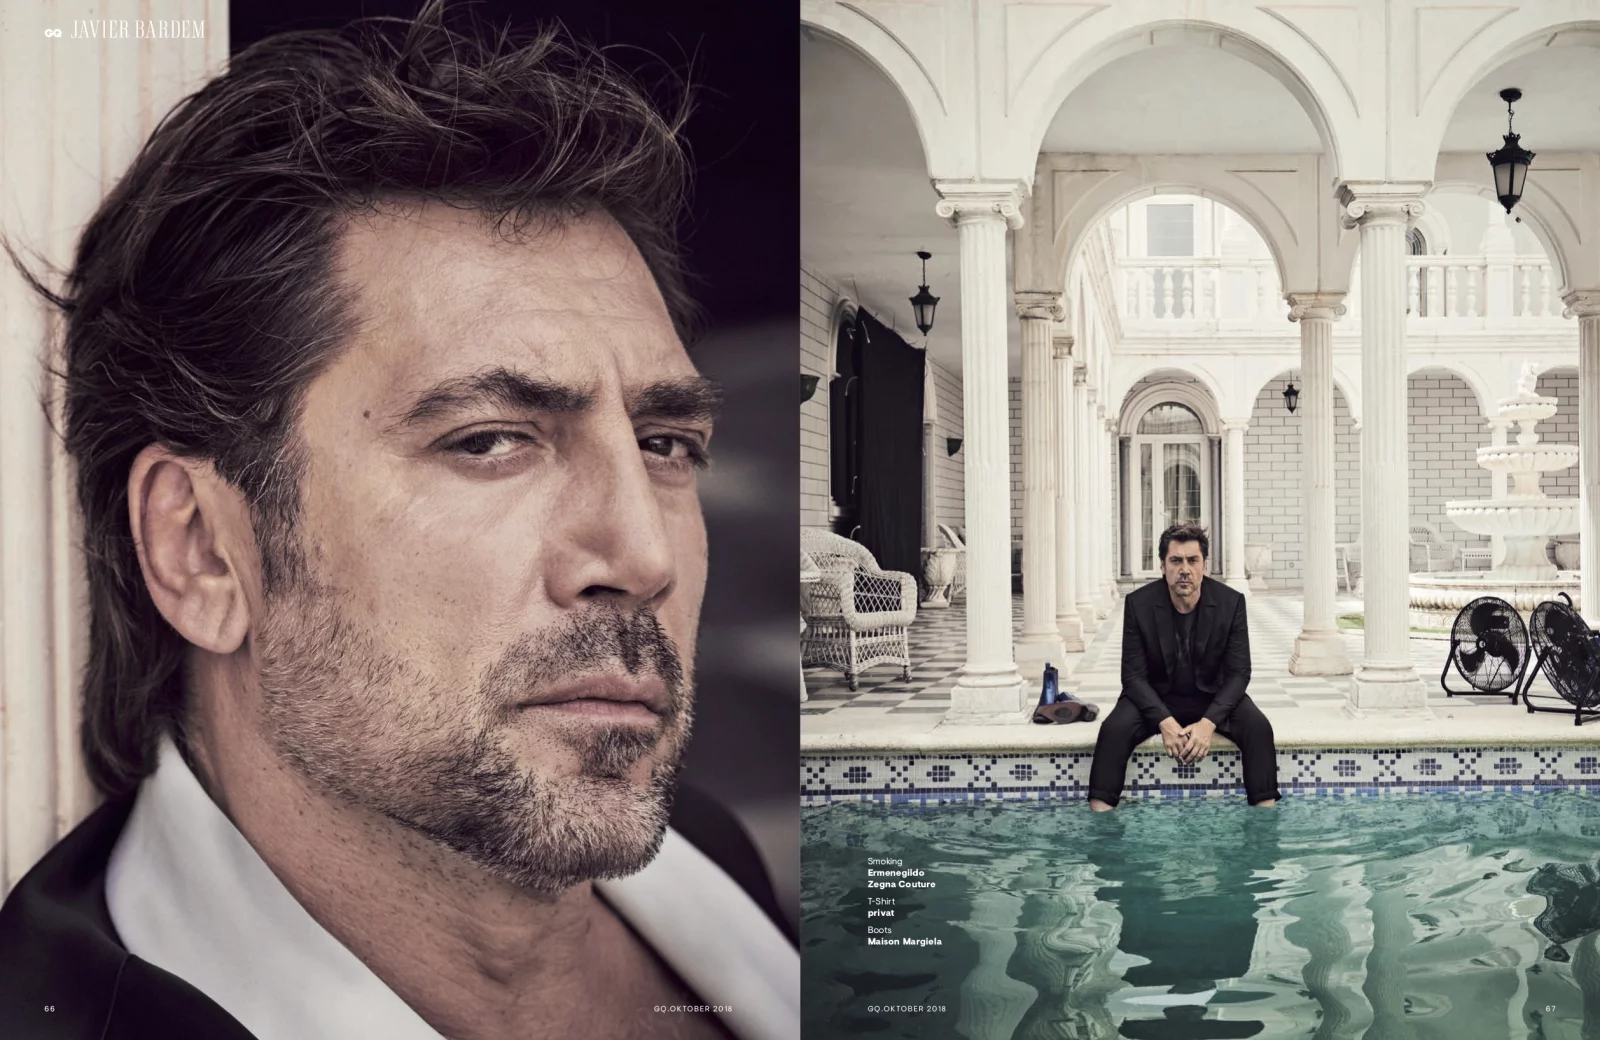 GQ with Javier Bardem 4 by Claudia ENGLMANN